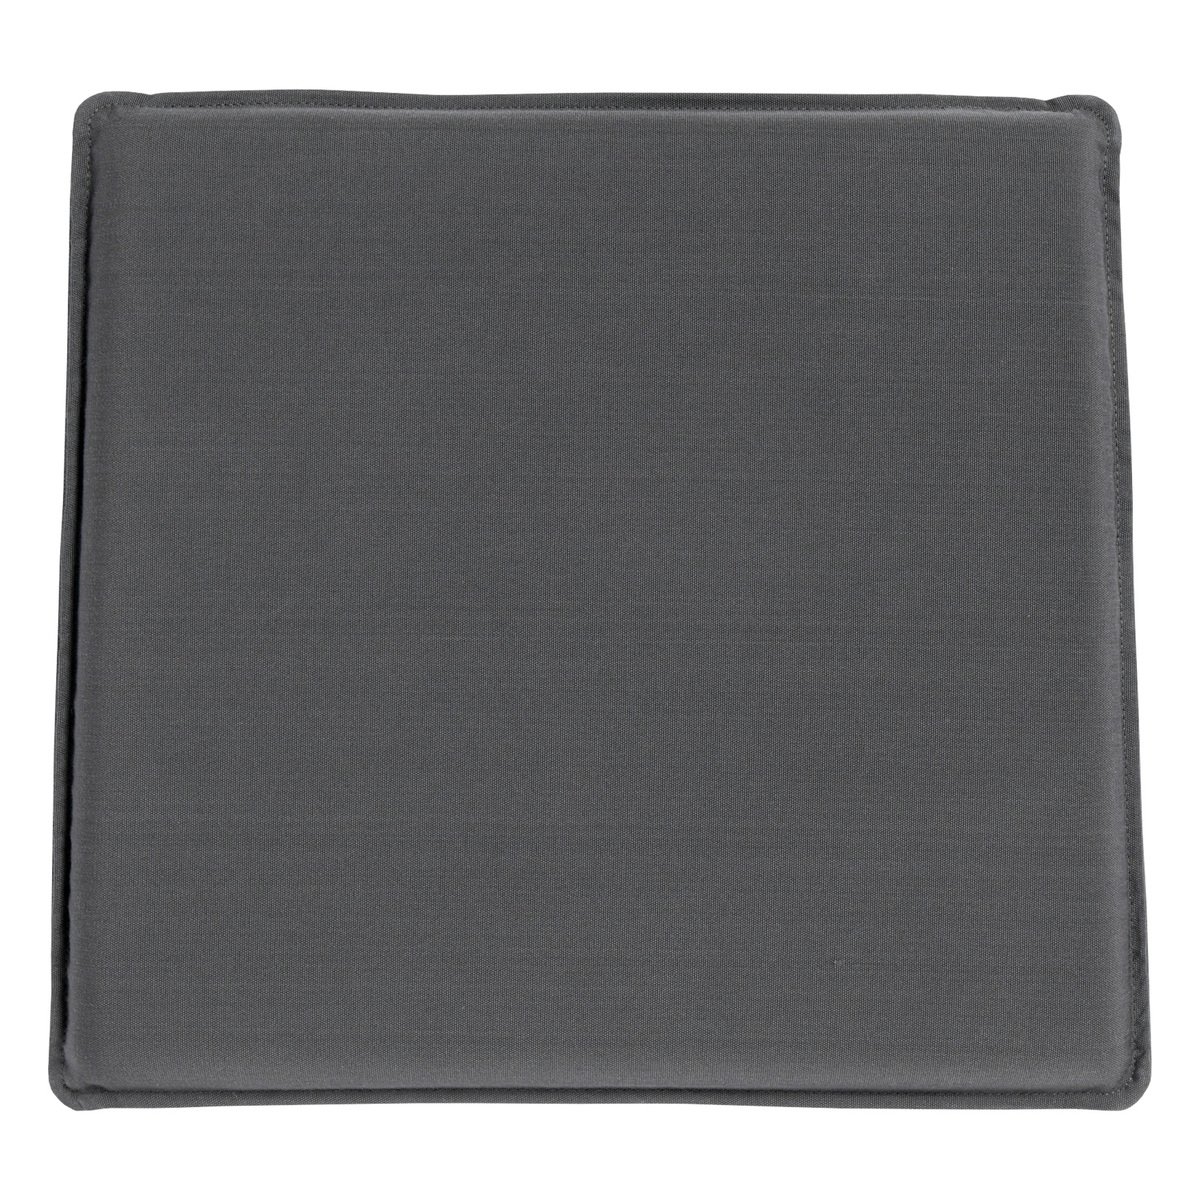 Hay Hee Seat Cushion For Chair, Anthracite